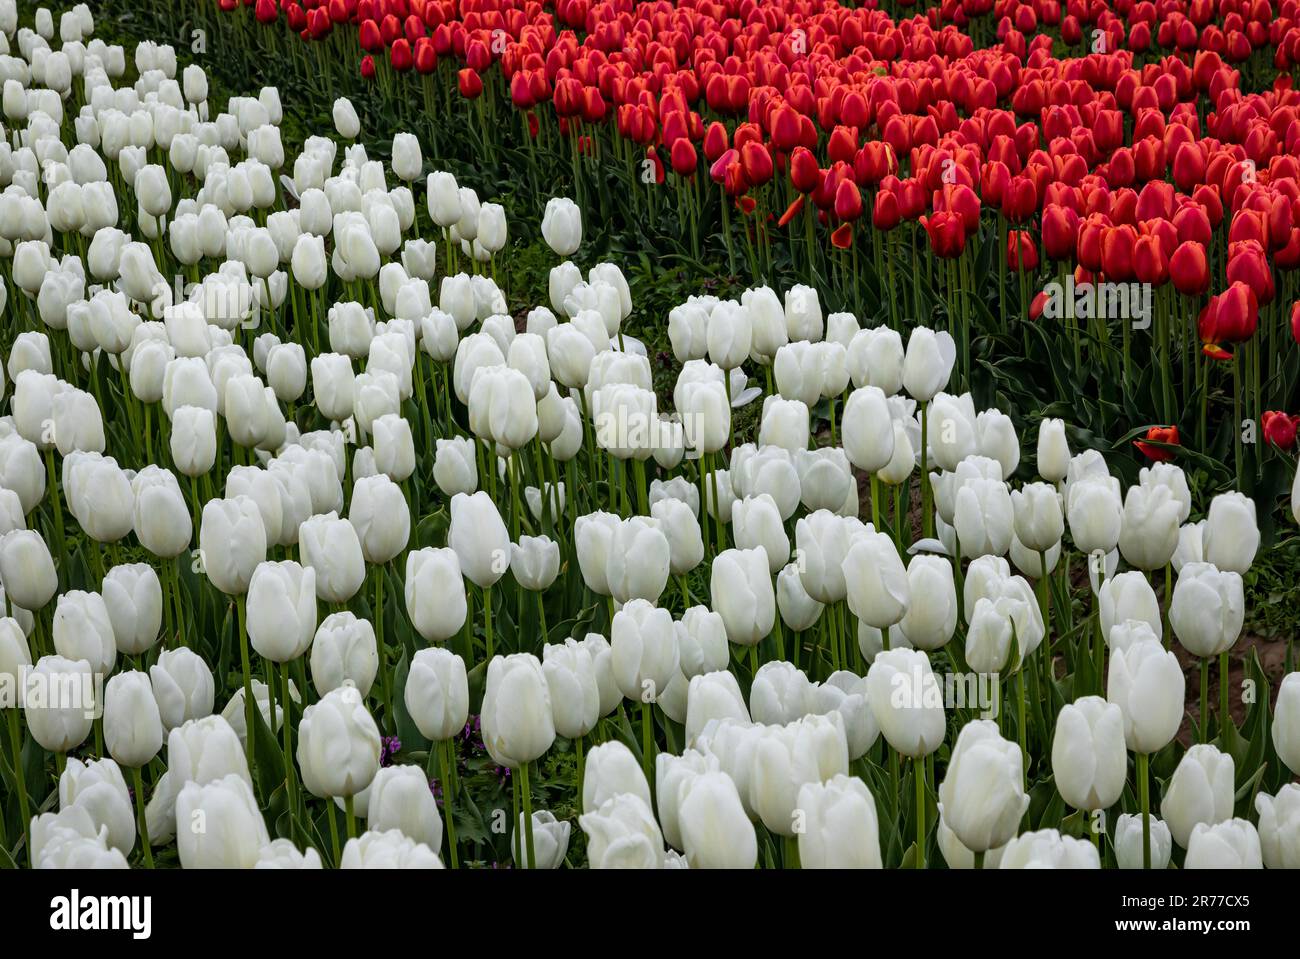 WA23408-00...WASHINGTON - Field of tulips, white and red, at RoosenGaarde Tulip and Bulb Farm in the Skagit Valley. Stock Photo